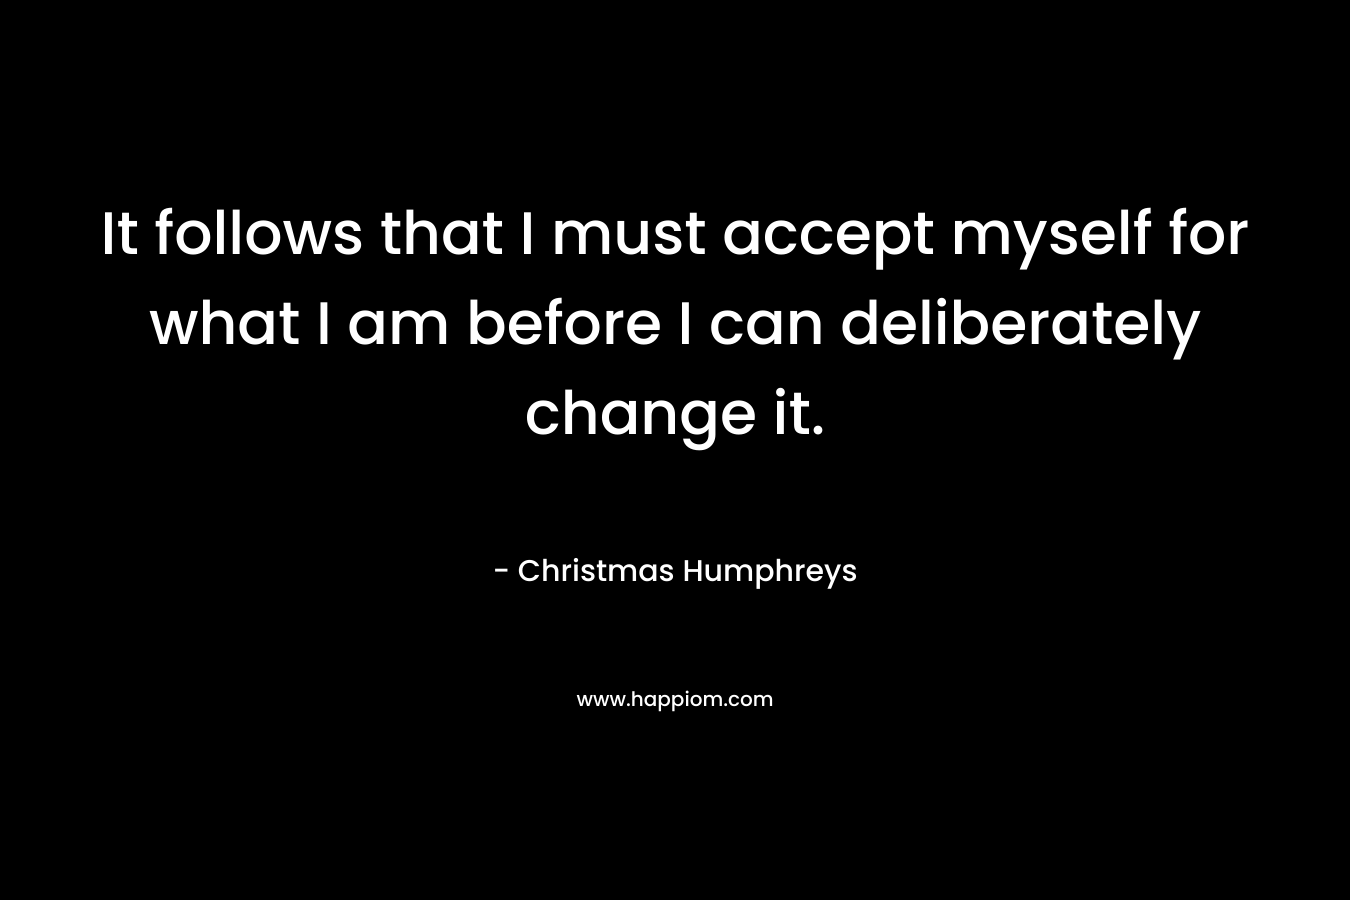 It follows that I must accept myself for what I am before I can deliberately change it.